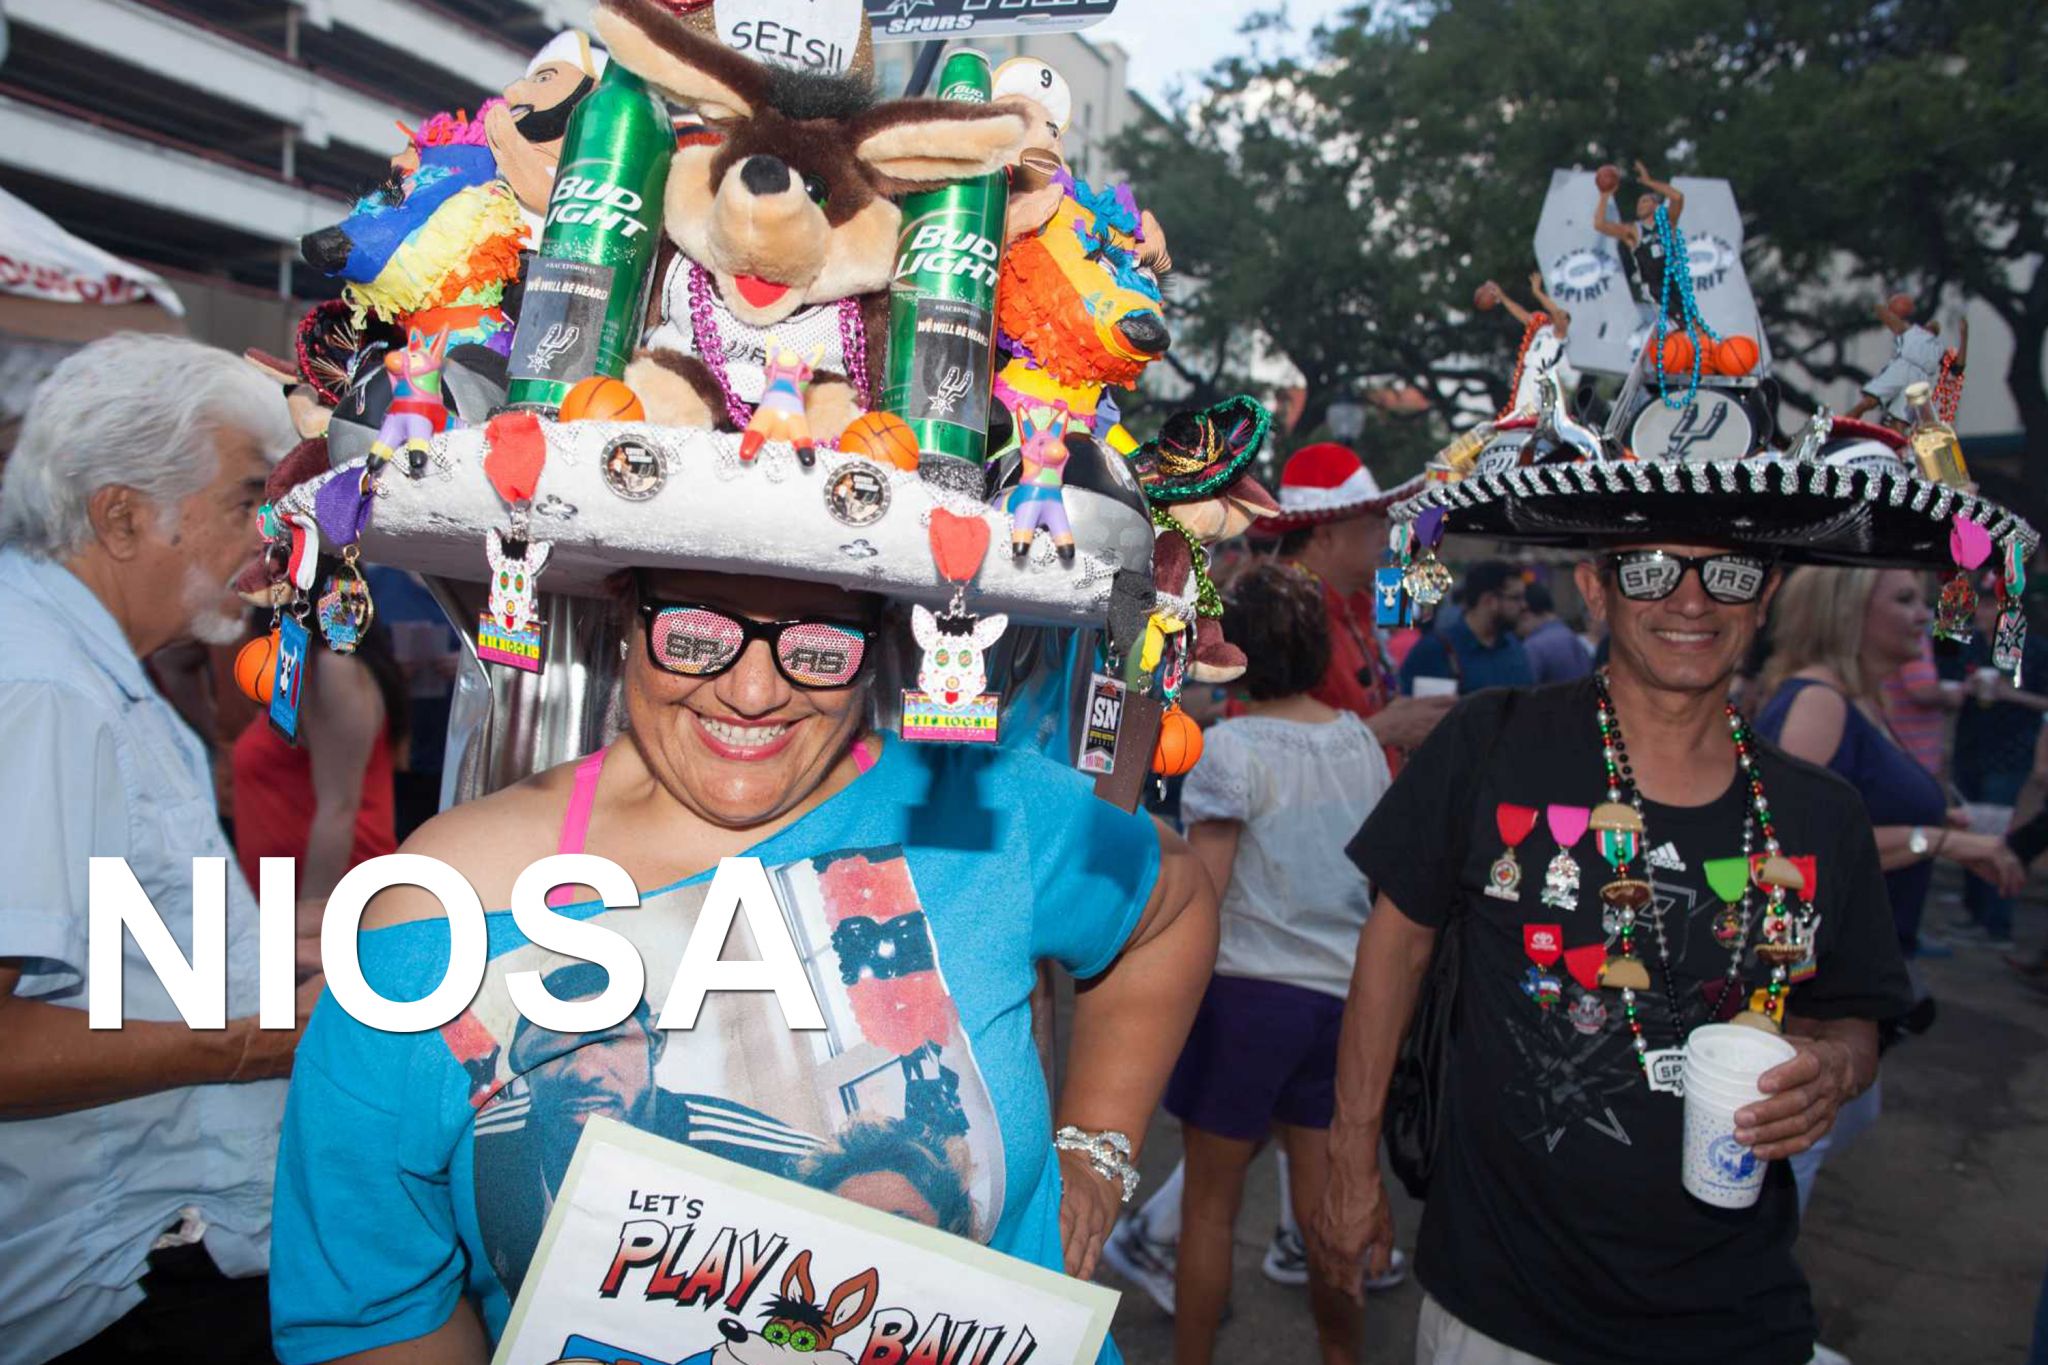 New to Fiesta? Here's your survival guide